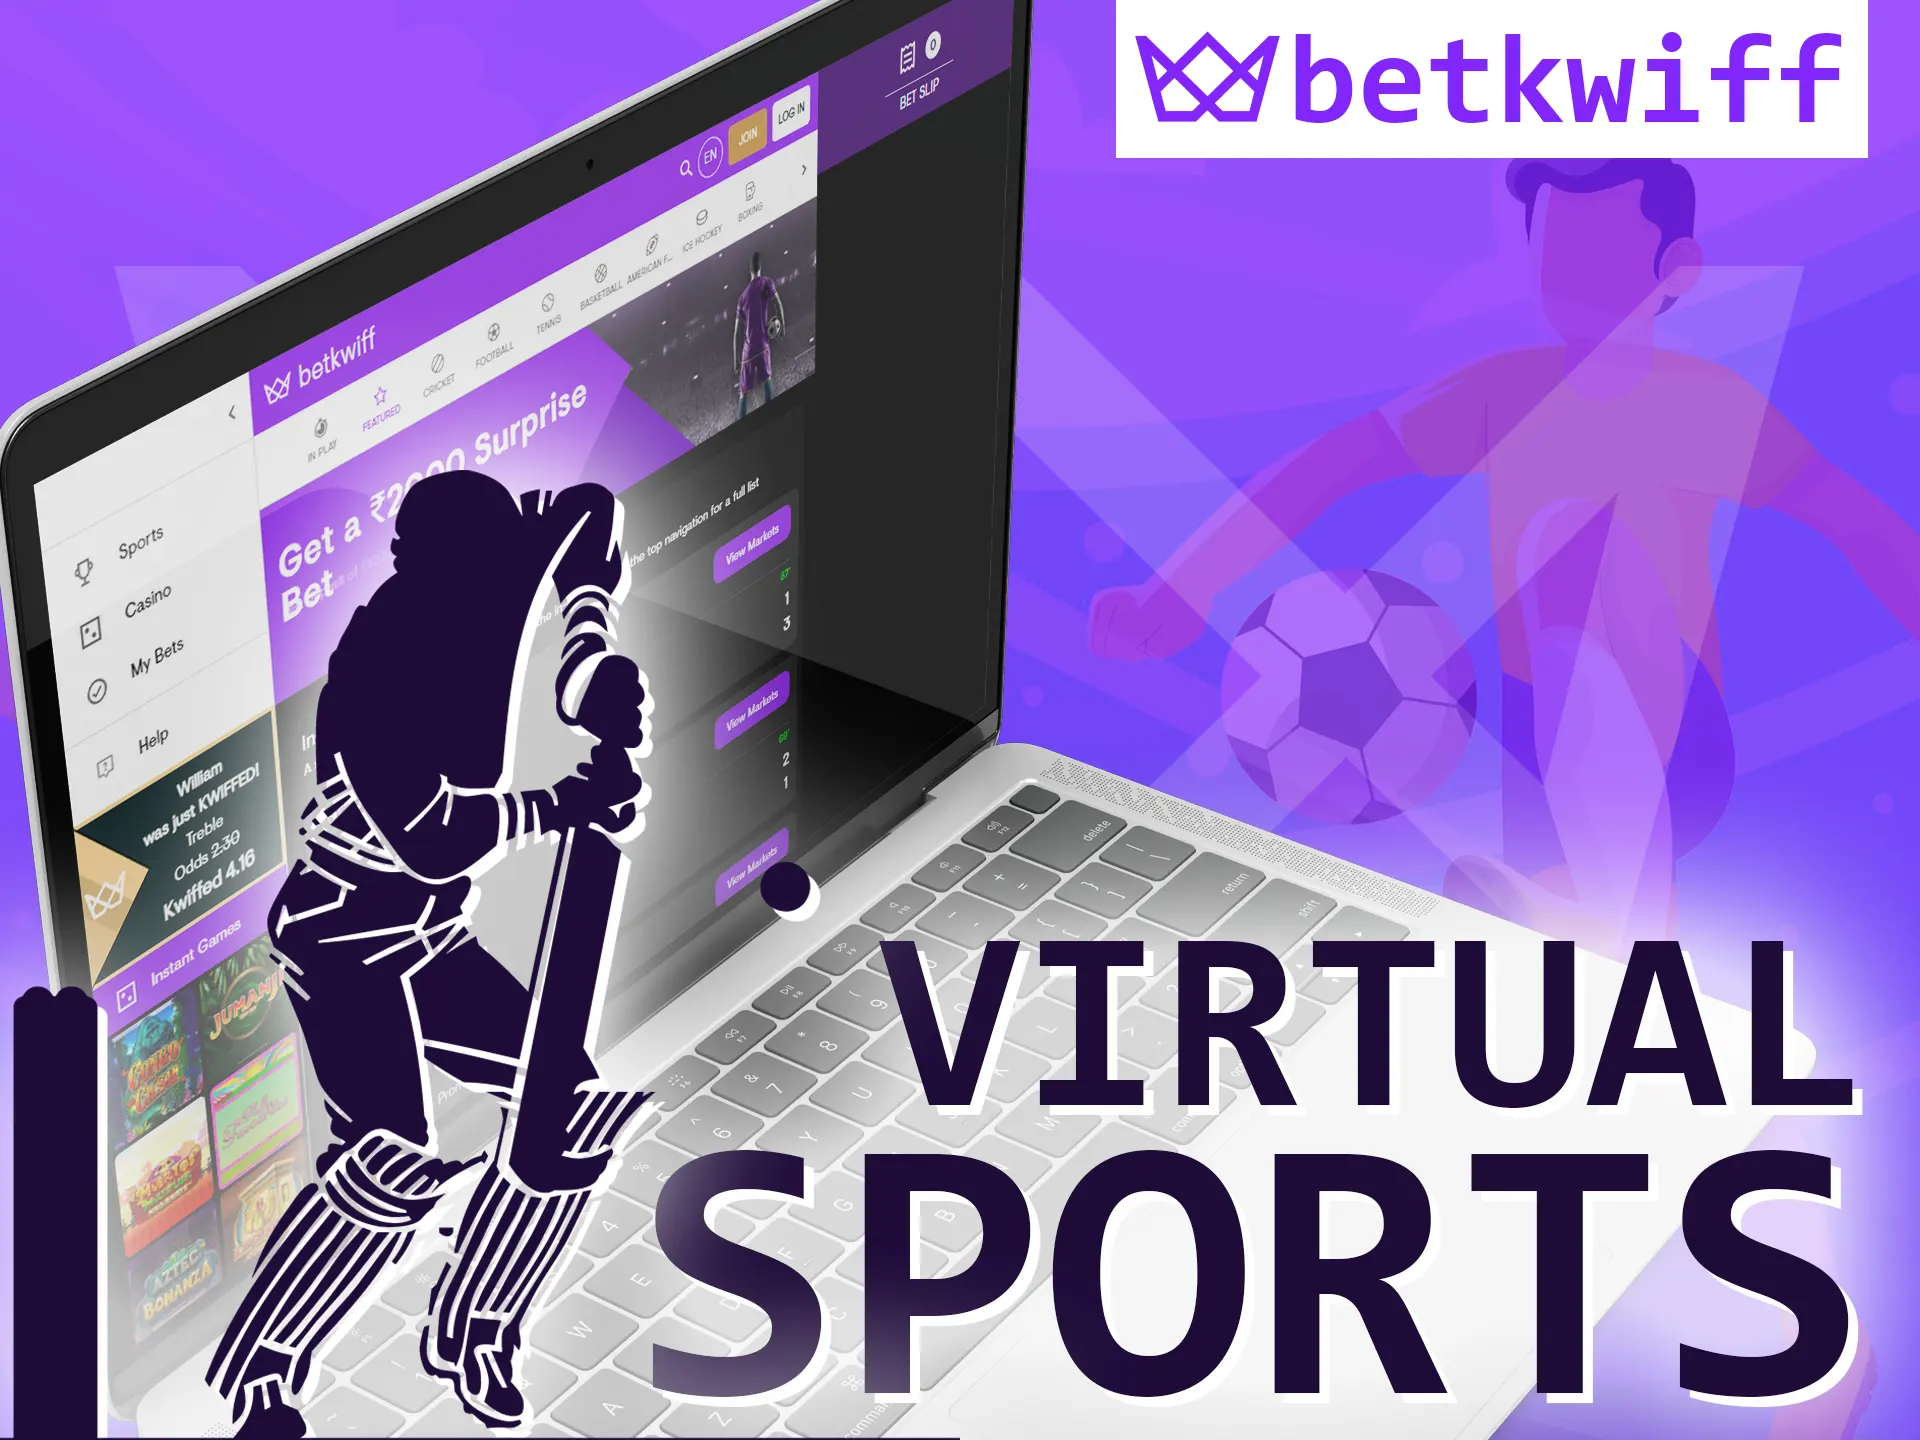 At Betkwiff you can bet on virtual sports.